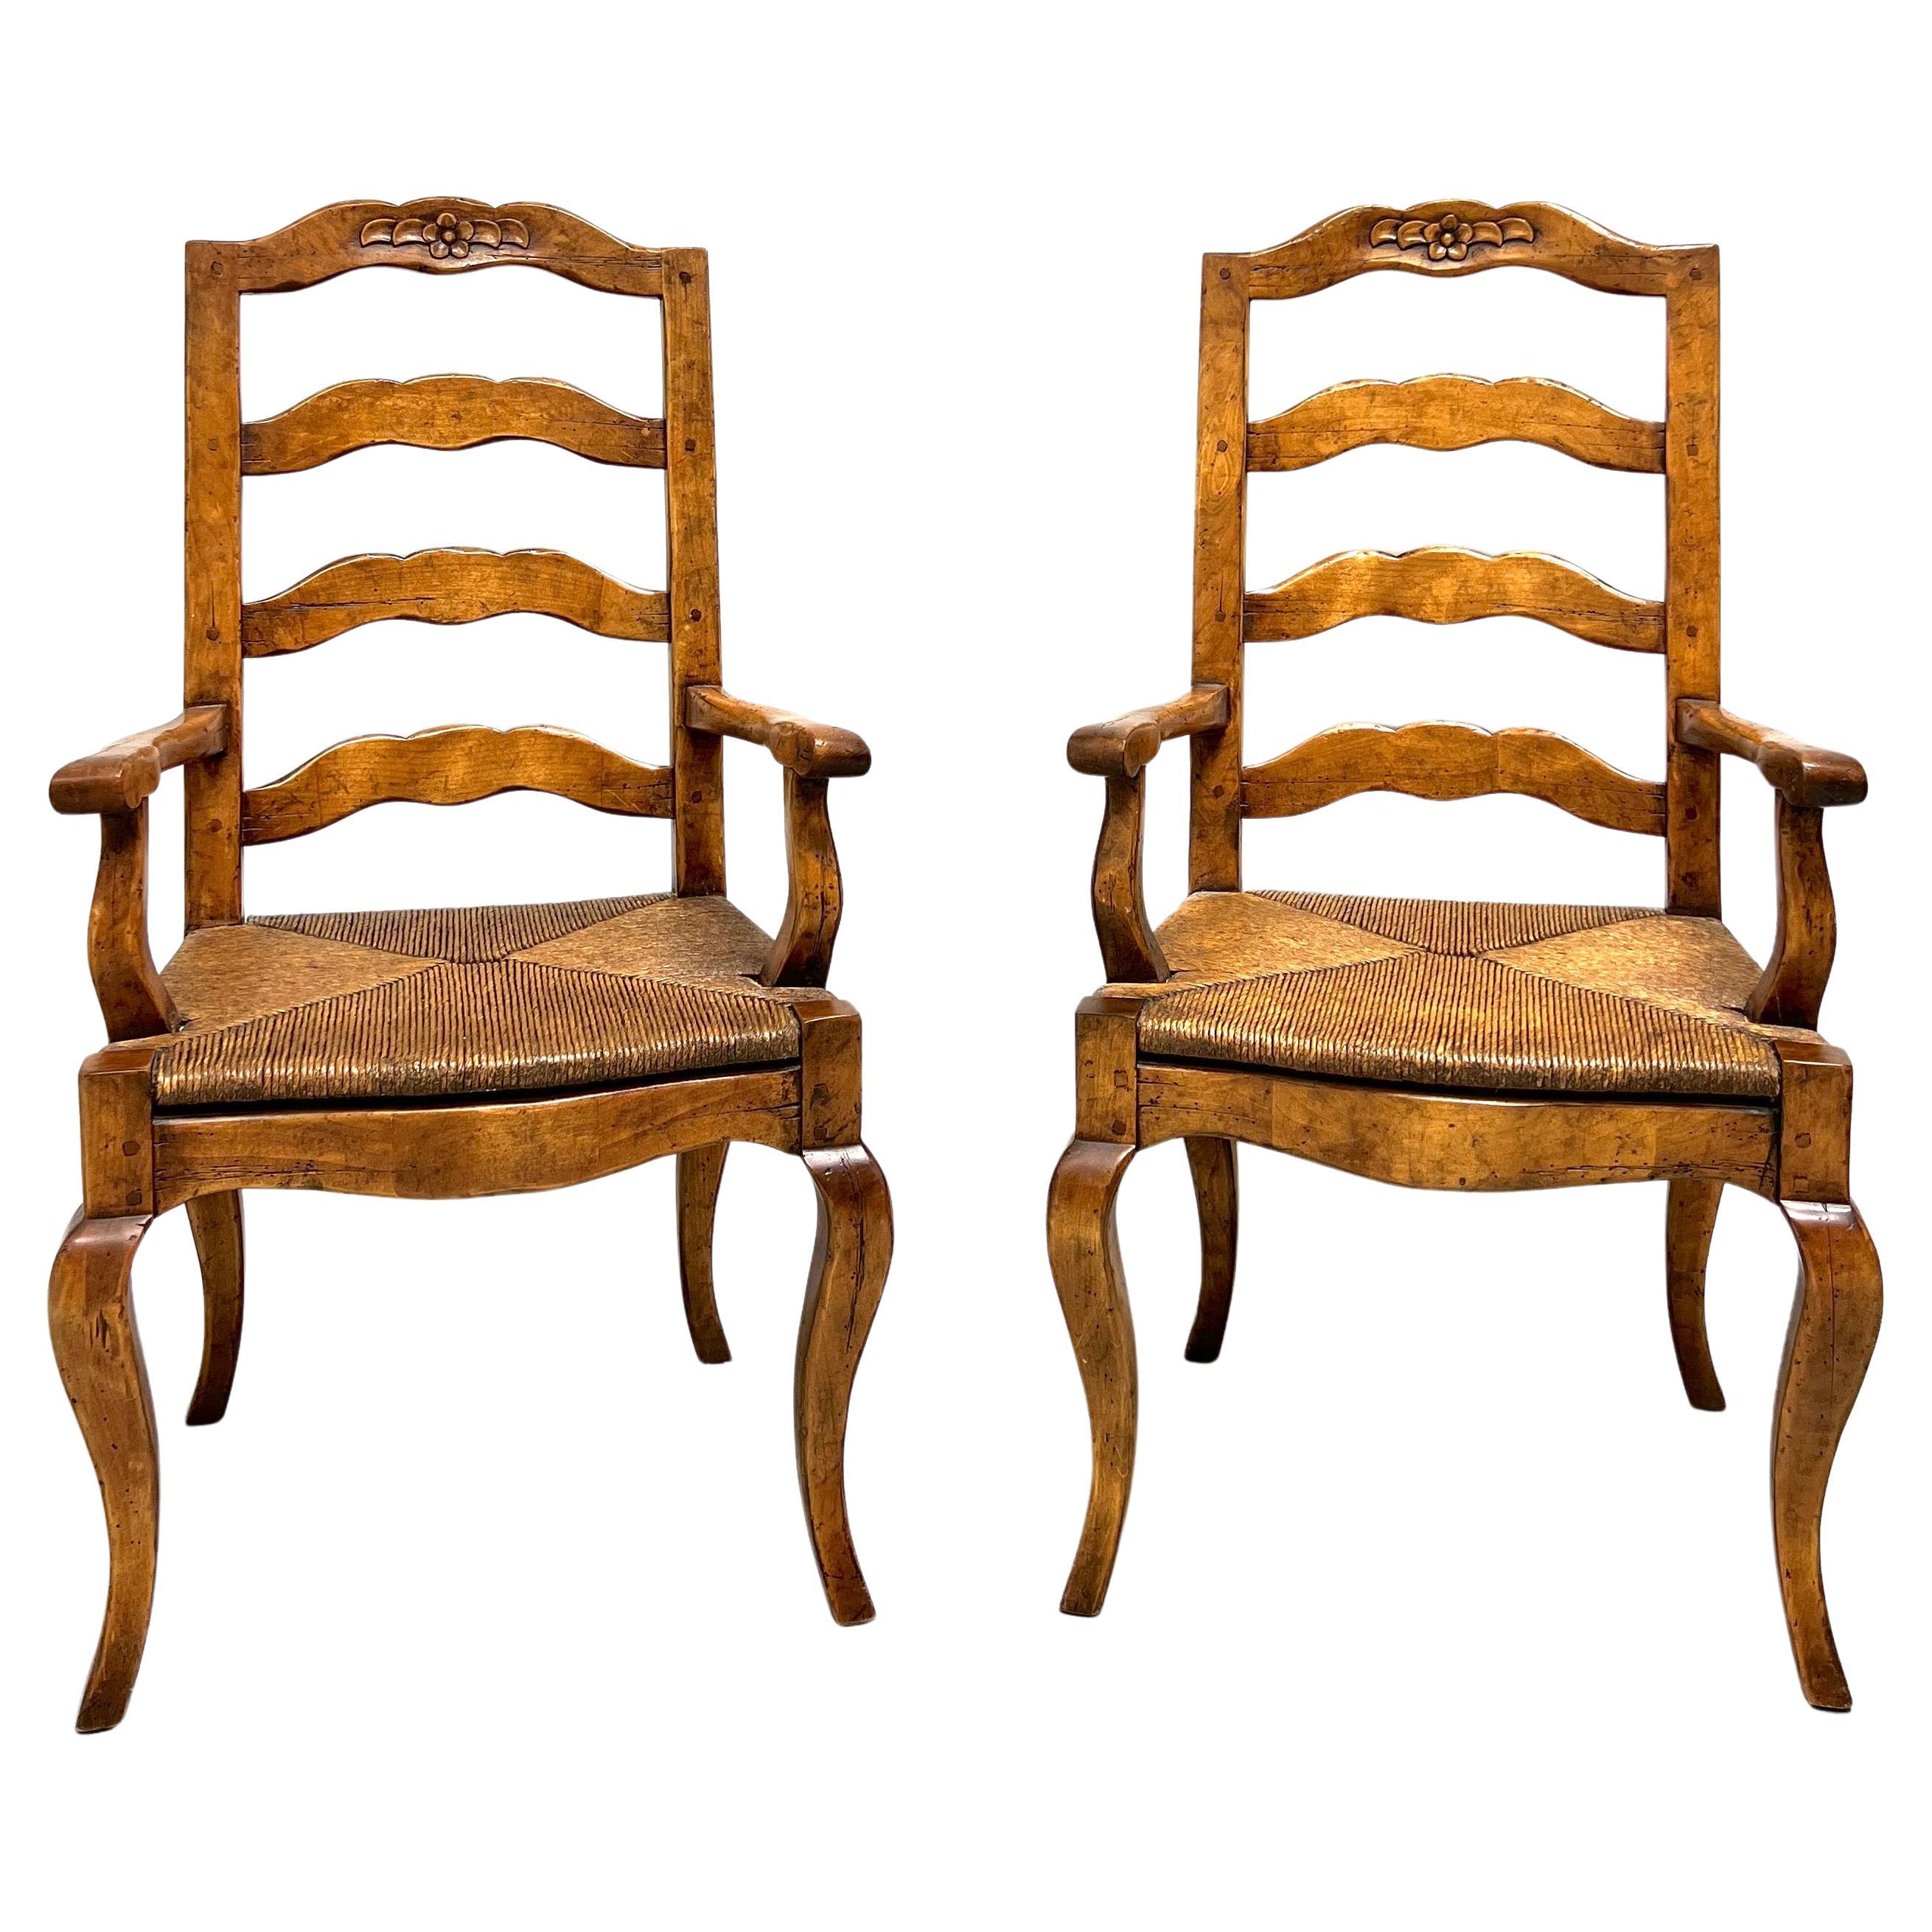 Late 20th C. Distressed French Country Dining Armchairs w/ Rush Seats - Pair For Sale